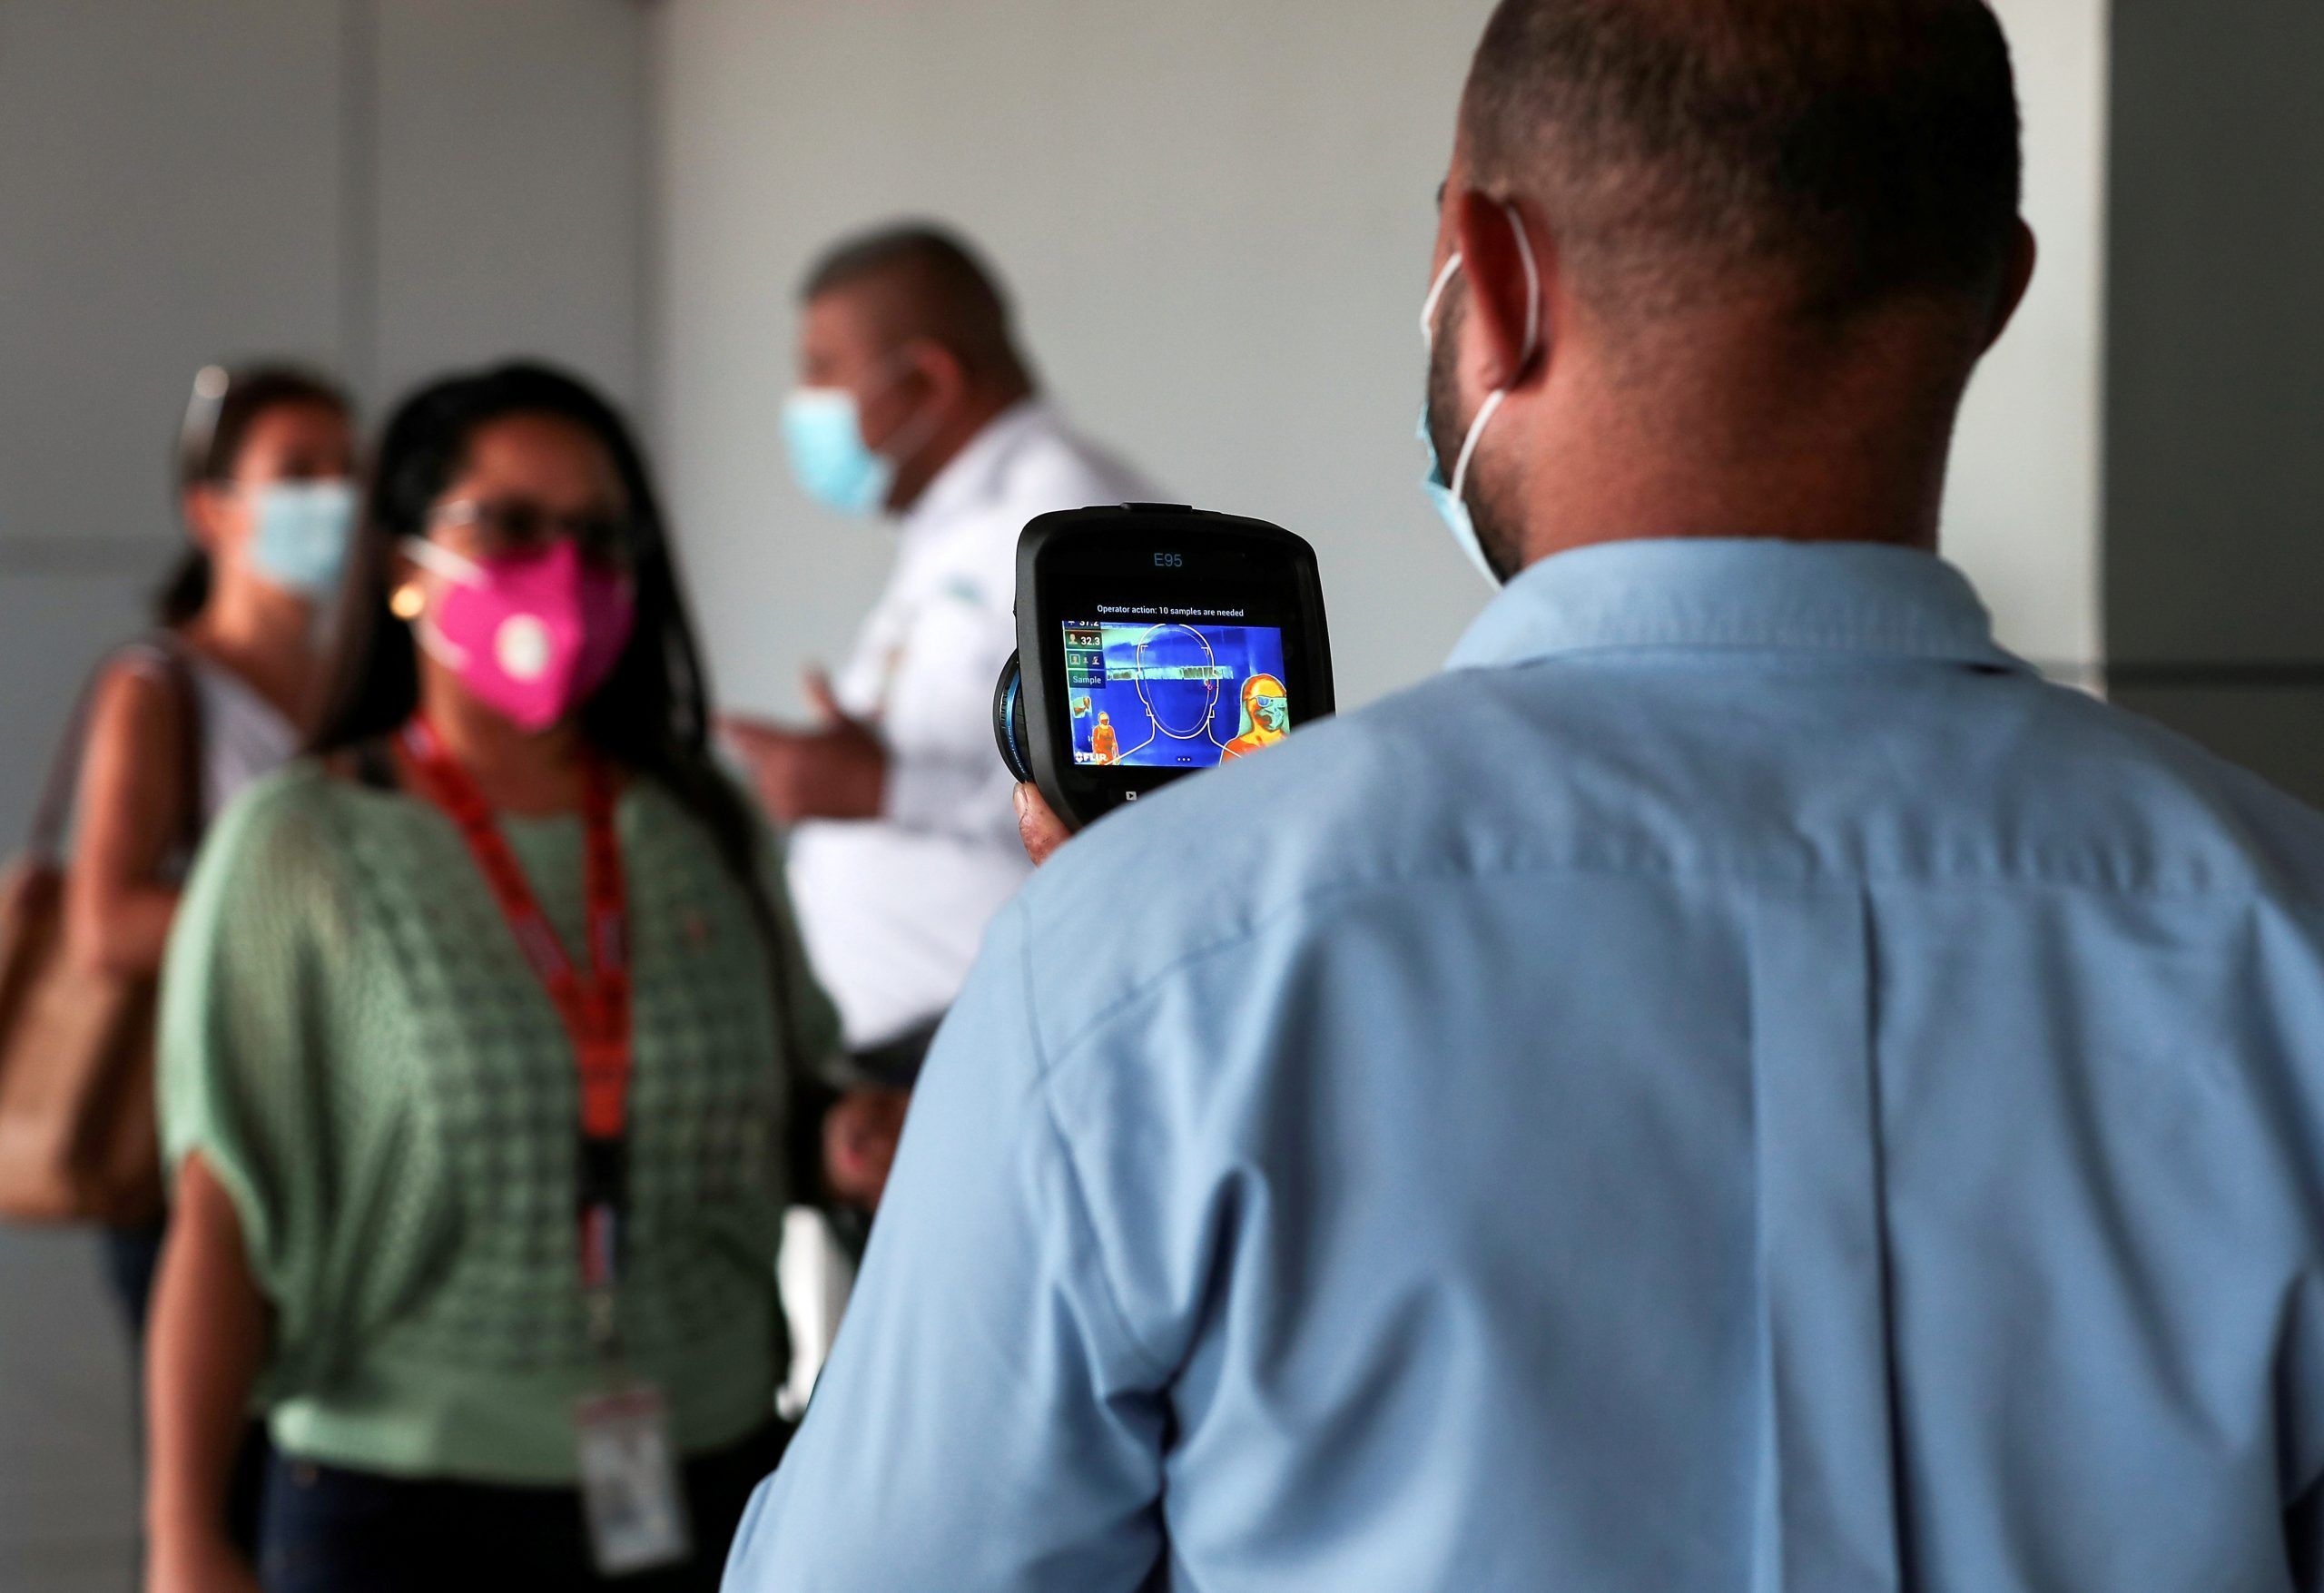 FILE PHOTO: An employee measures the temperatures of travelers at the Tocumen International Airport during the coronavirus disease (COVID-19) outbreak, in Panama City, Panama October 16, 2020. Picture taken October 16, 2020. REUTERS/Erick Marciscano/File Photo